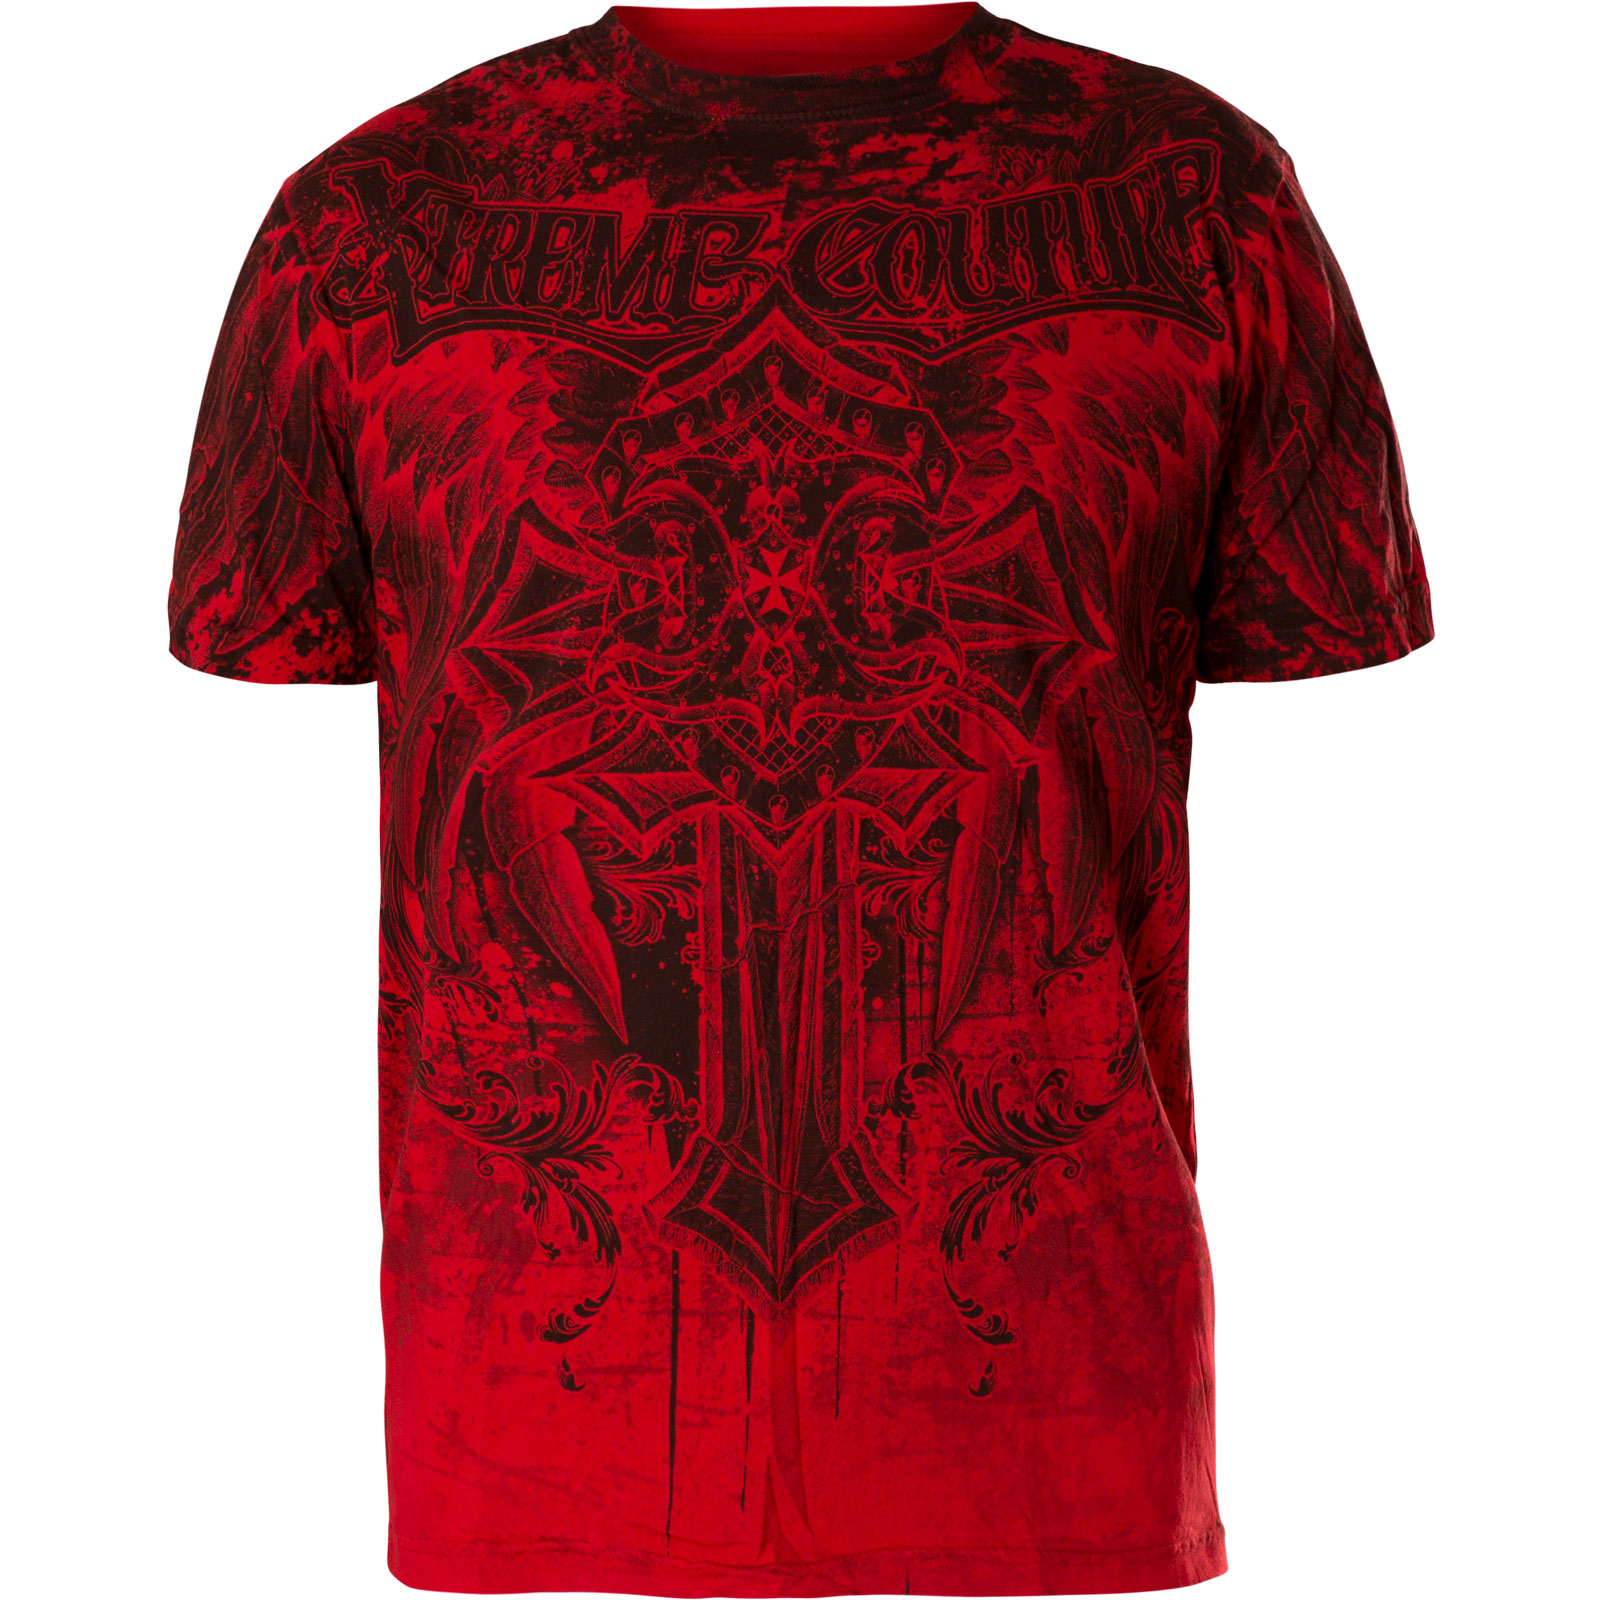 Xtreme Couture T- Shirt Lifetaker with crests, wings and lettering